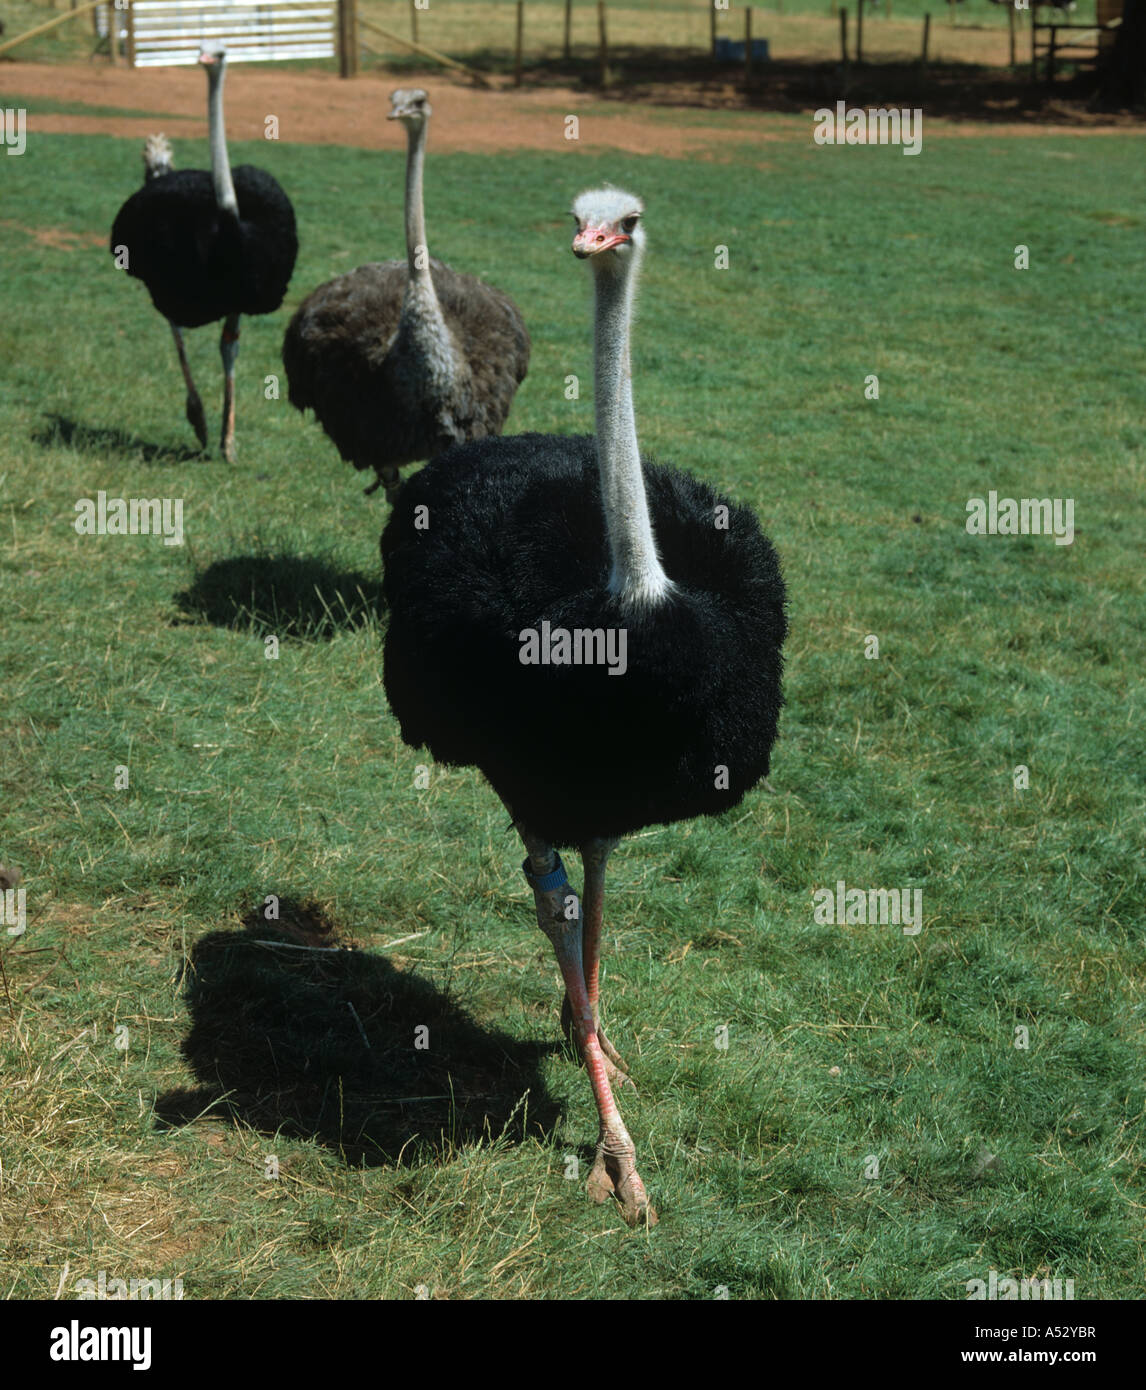 Male ostrich in an enclosure followed by a female and another male Devon Stock Photo